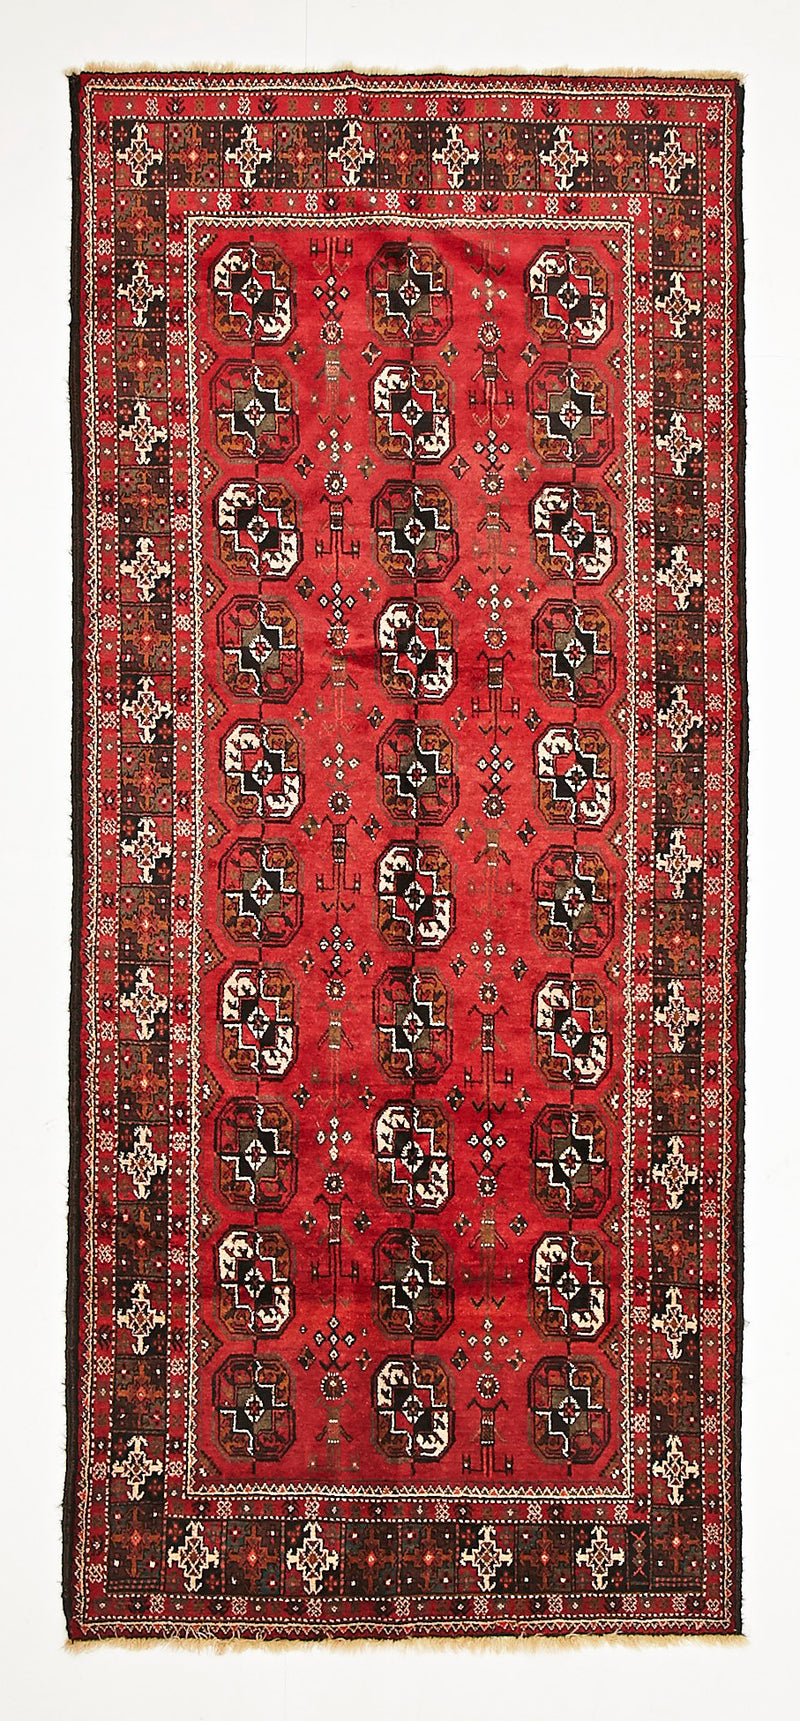 HAND KNOTTED PERSIAN FINE BALUCH RUG 277 X 120 CM